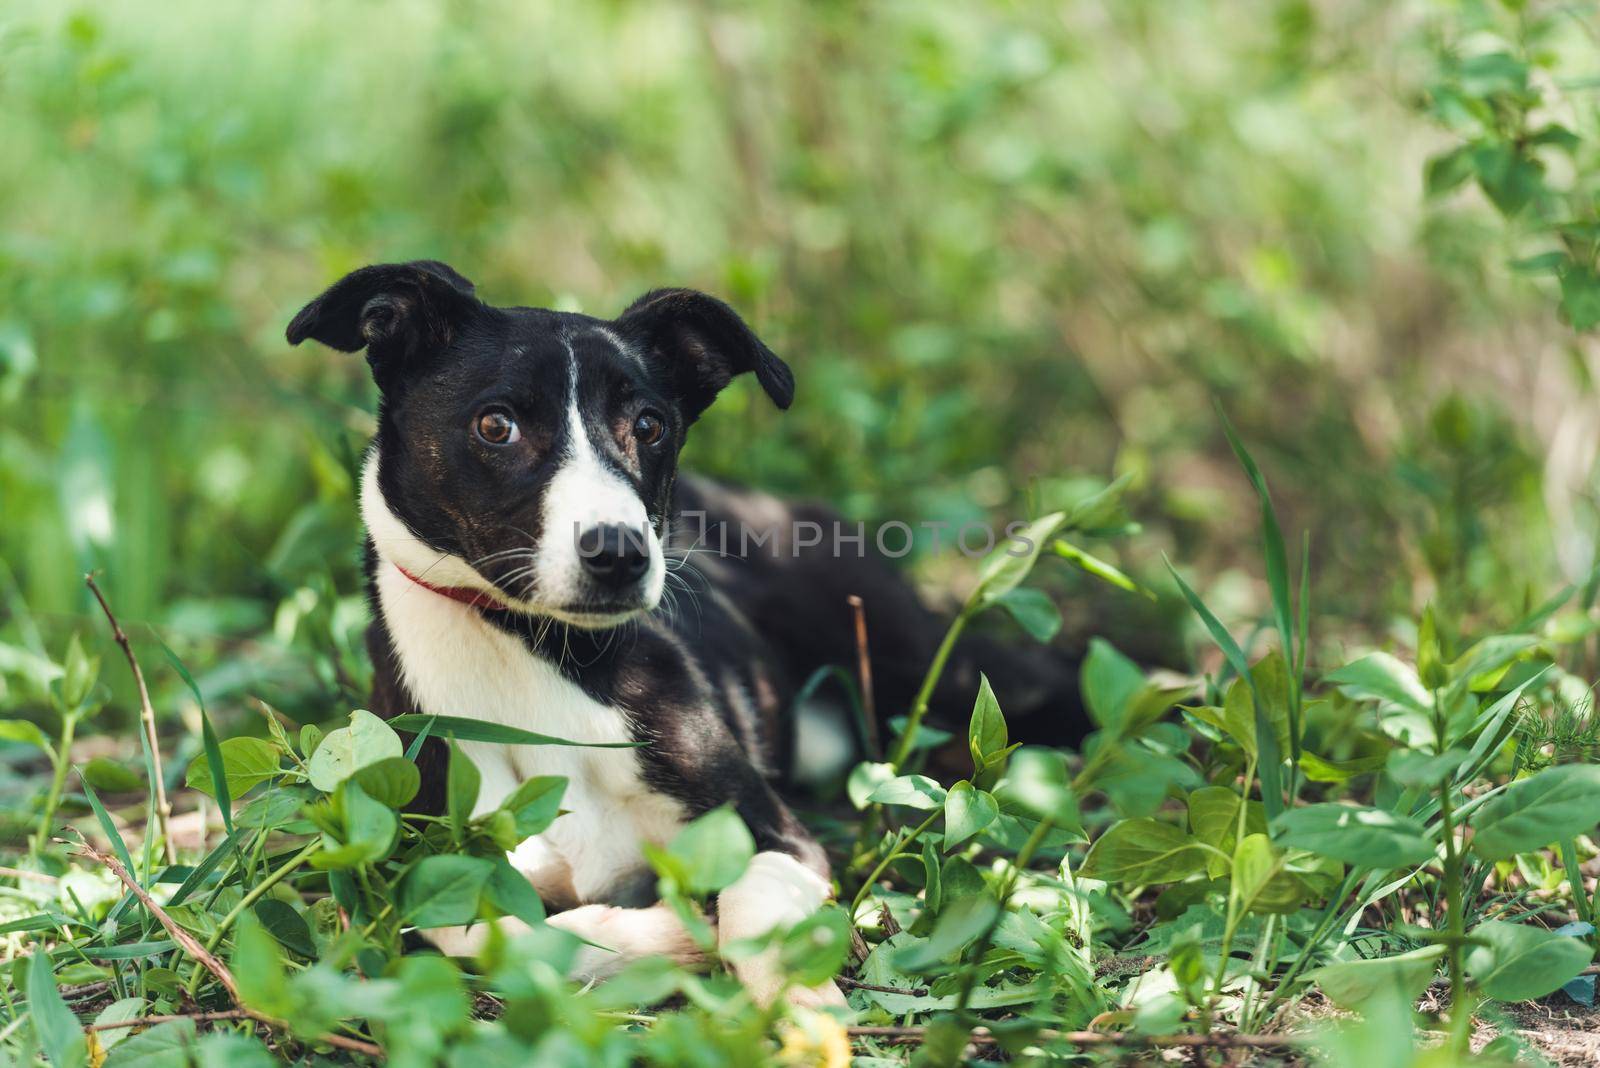 Cute slim doggy is very careful when seeing humans in local garden